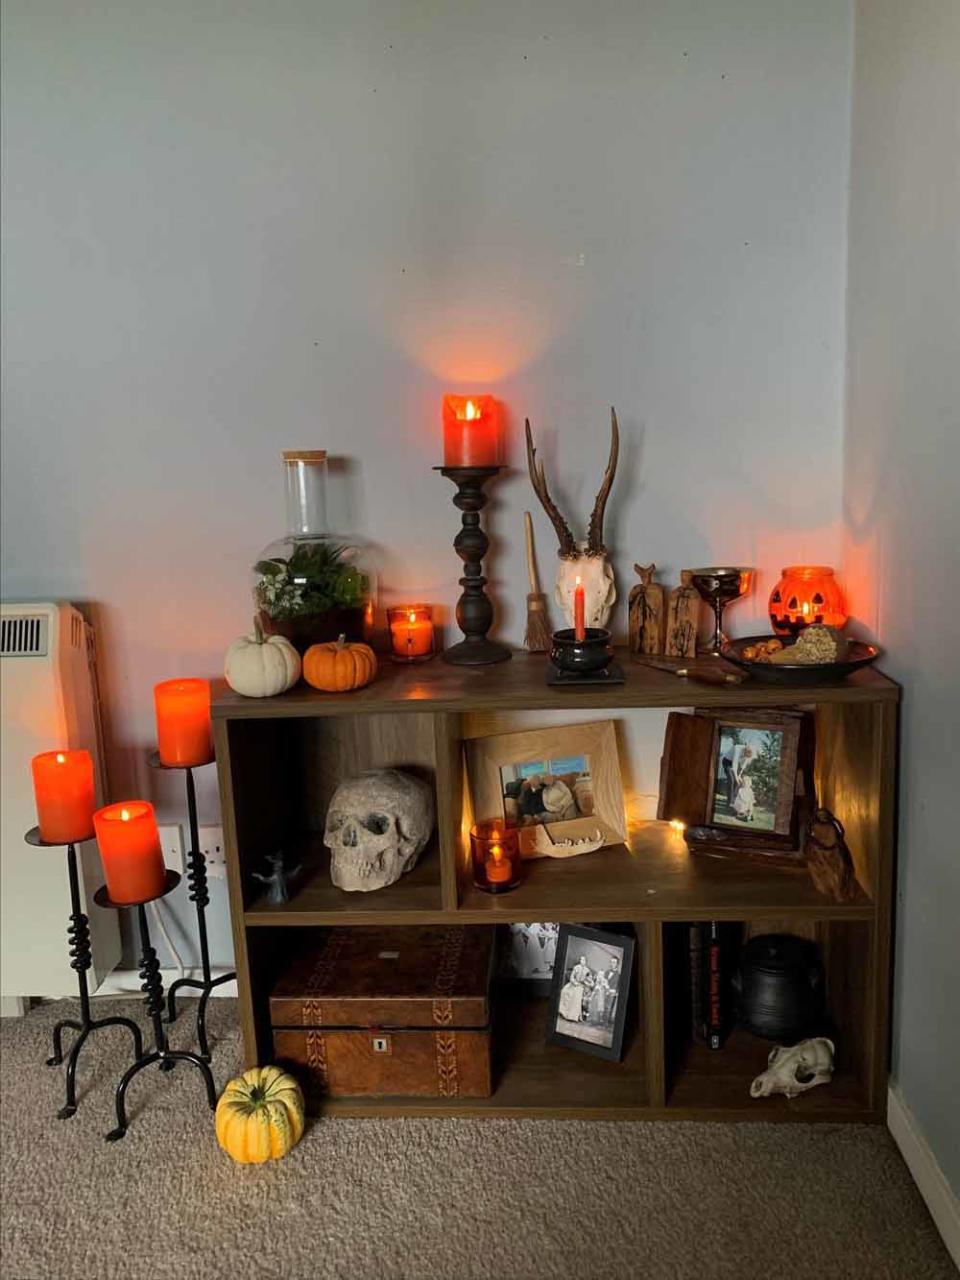 Alexa celebrates Halloween with a big meal and decorates her altar for the spooky season (Collect/PA Real Life)